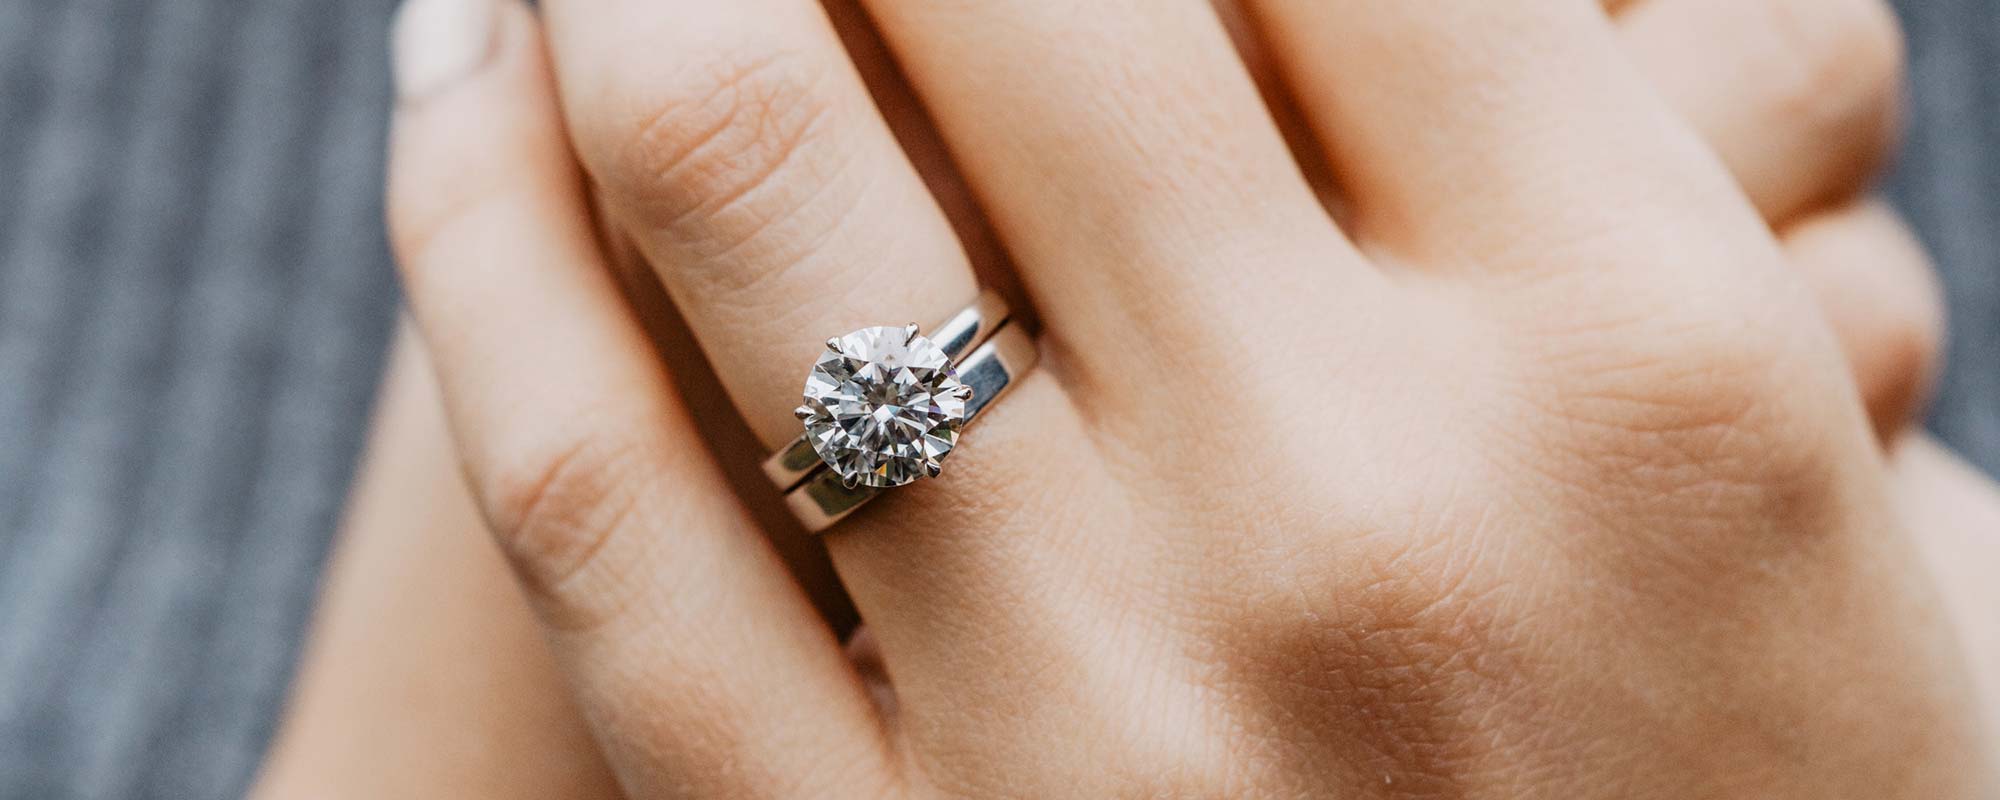 3.0ct Solitaire Engagement Ring Made using lab grown diamonds and recycled or Fairtrade precious metals, engagement rings from Ethica tick all the boxes for those of us who are looking to live more sustainably.